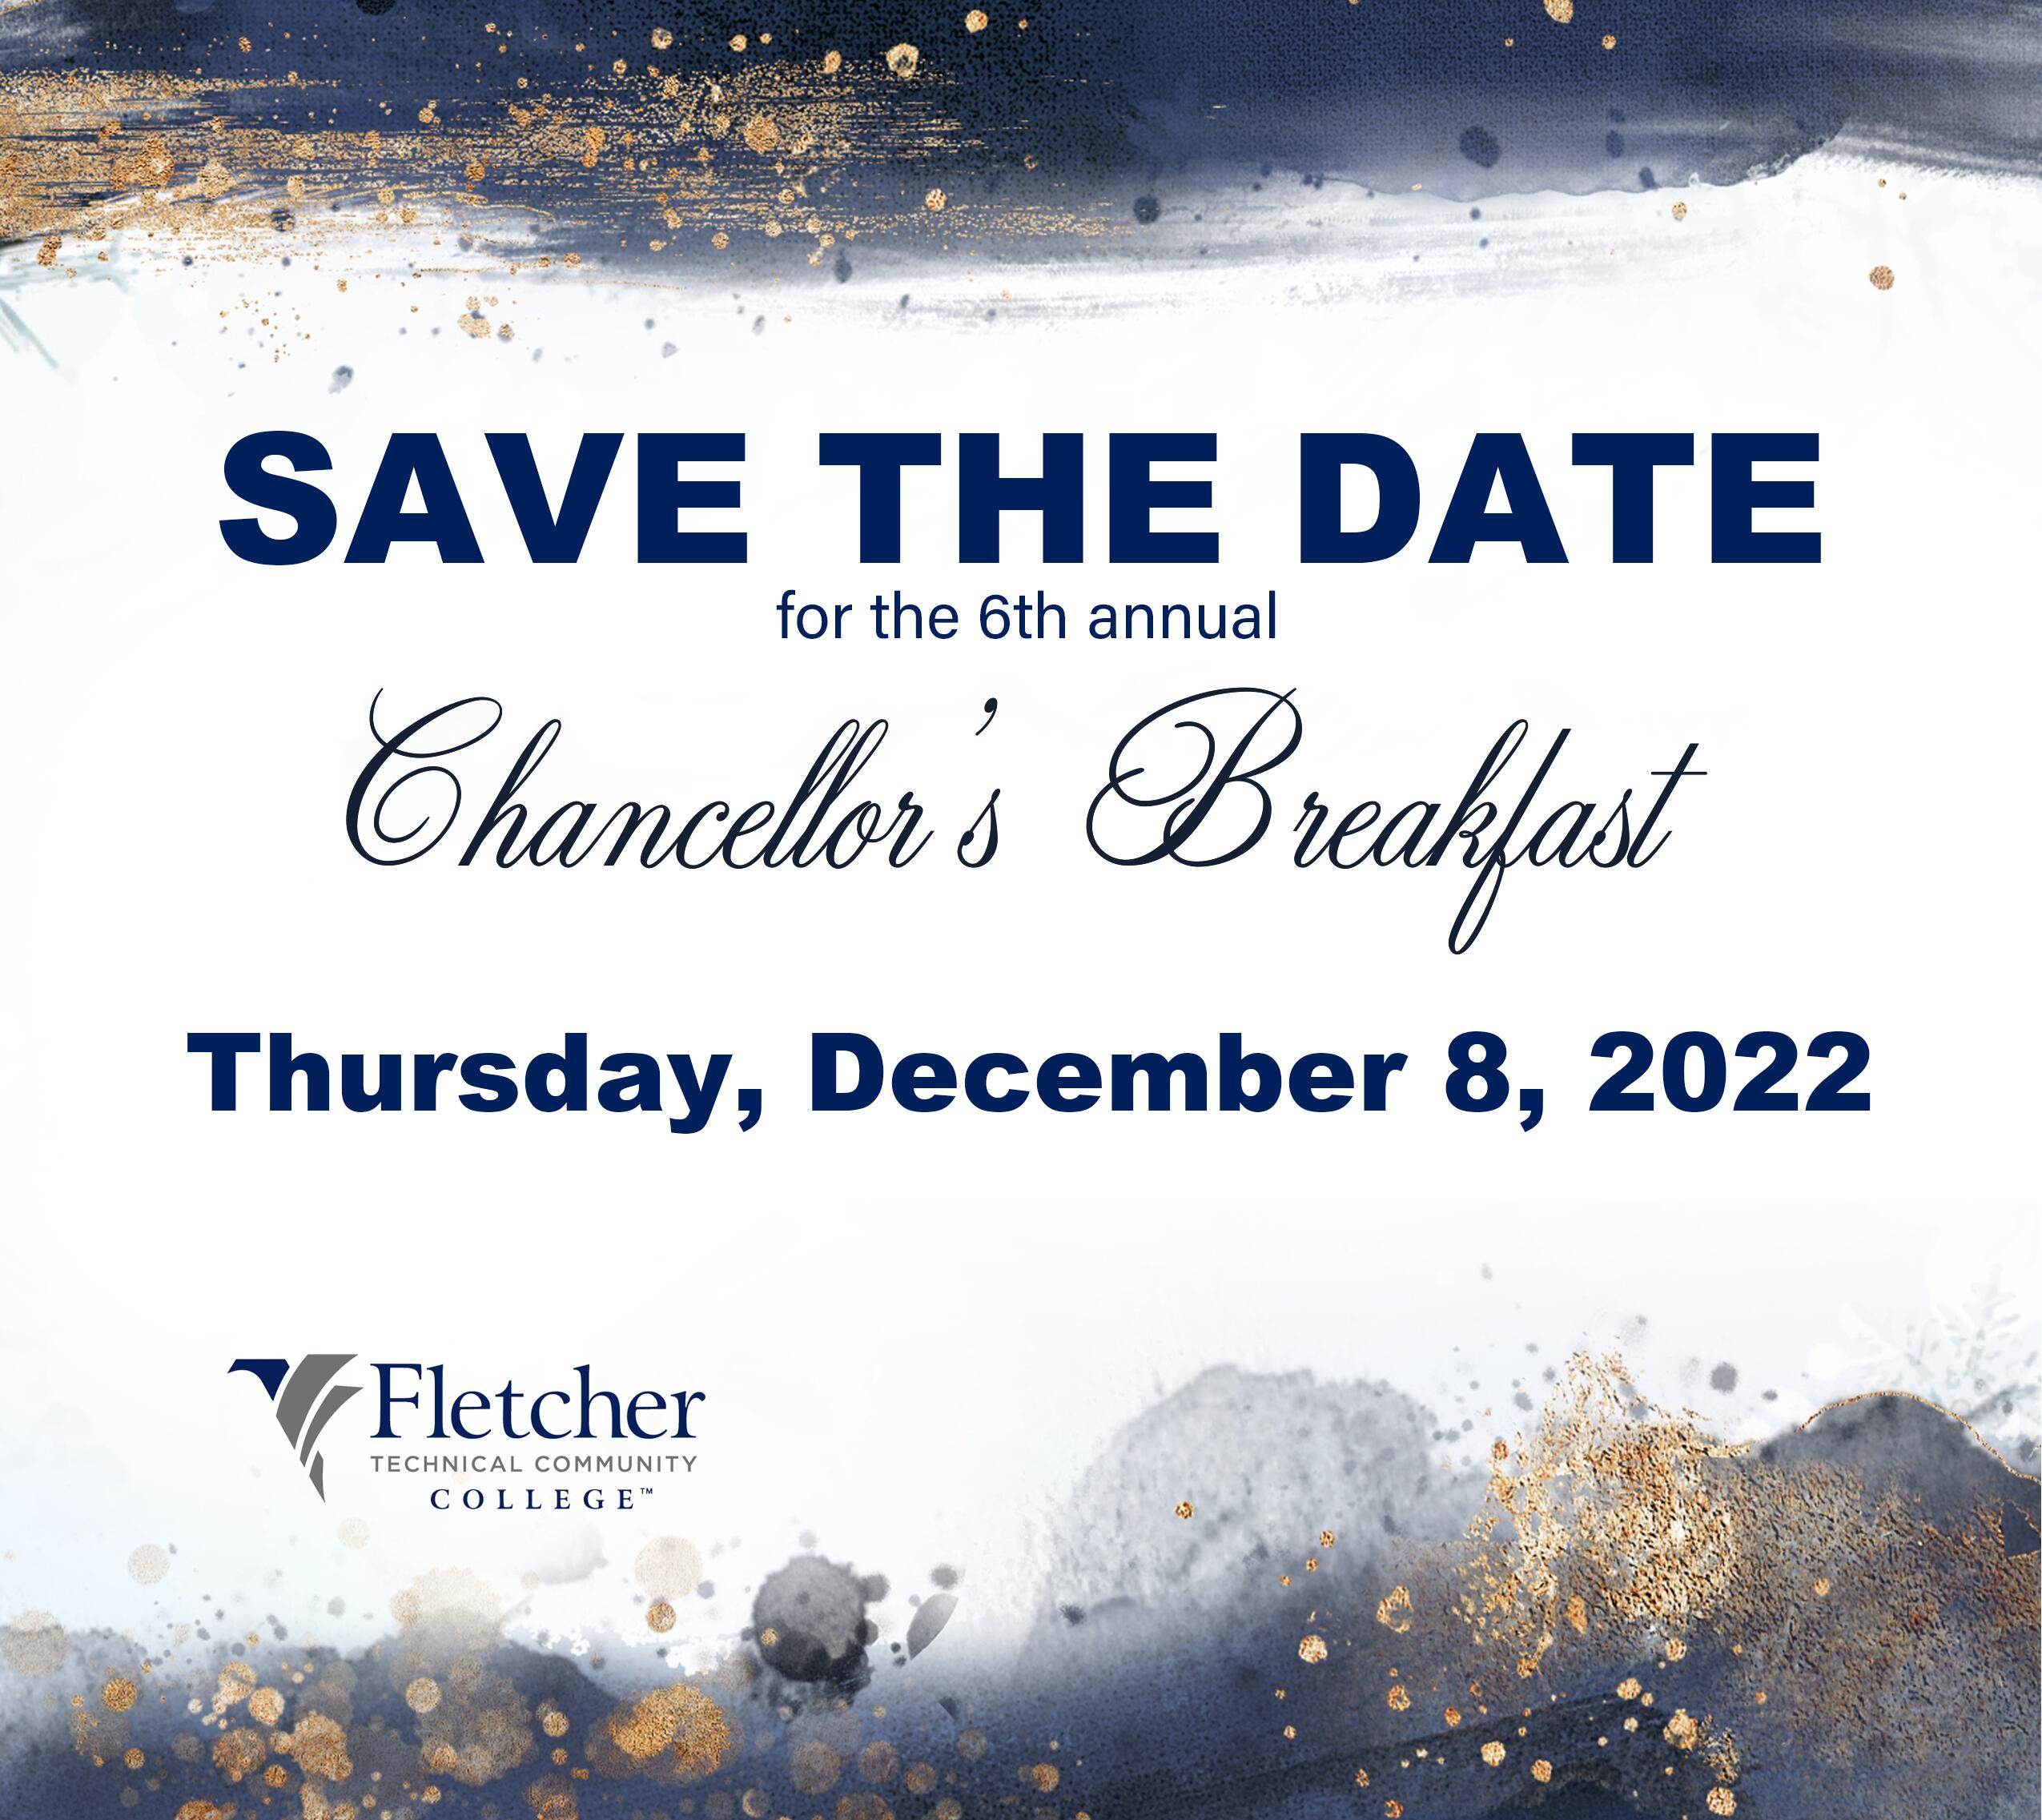 Chancellor's Breakfast Save the Date